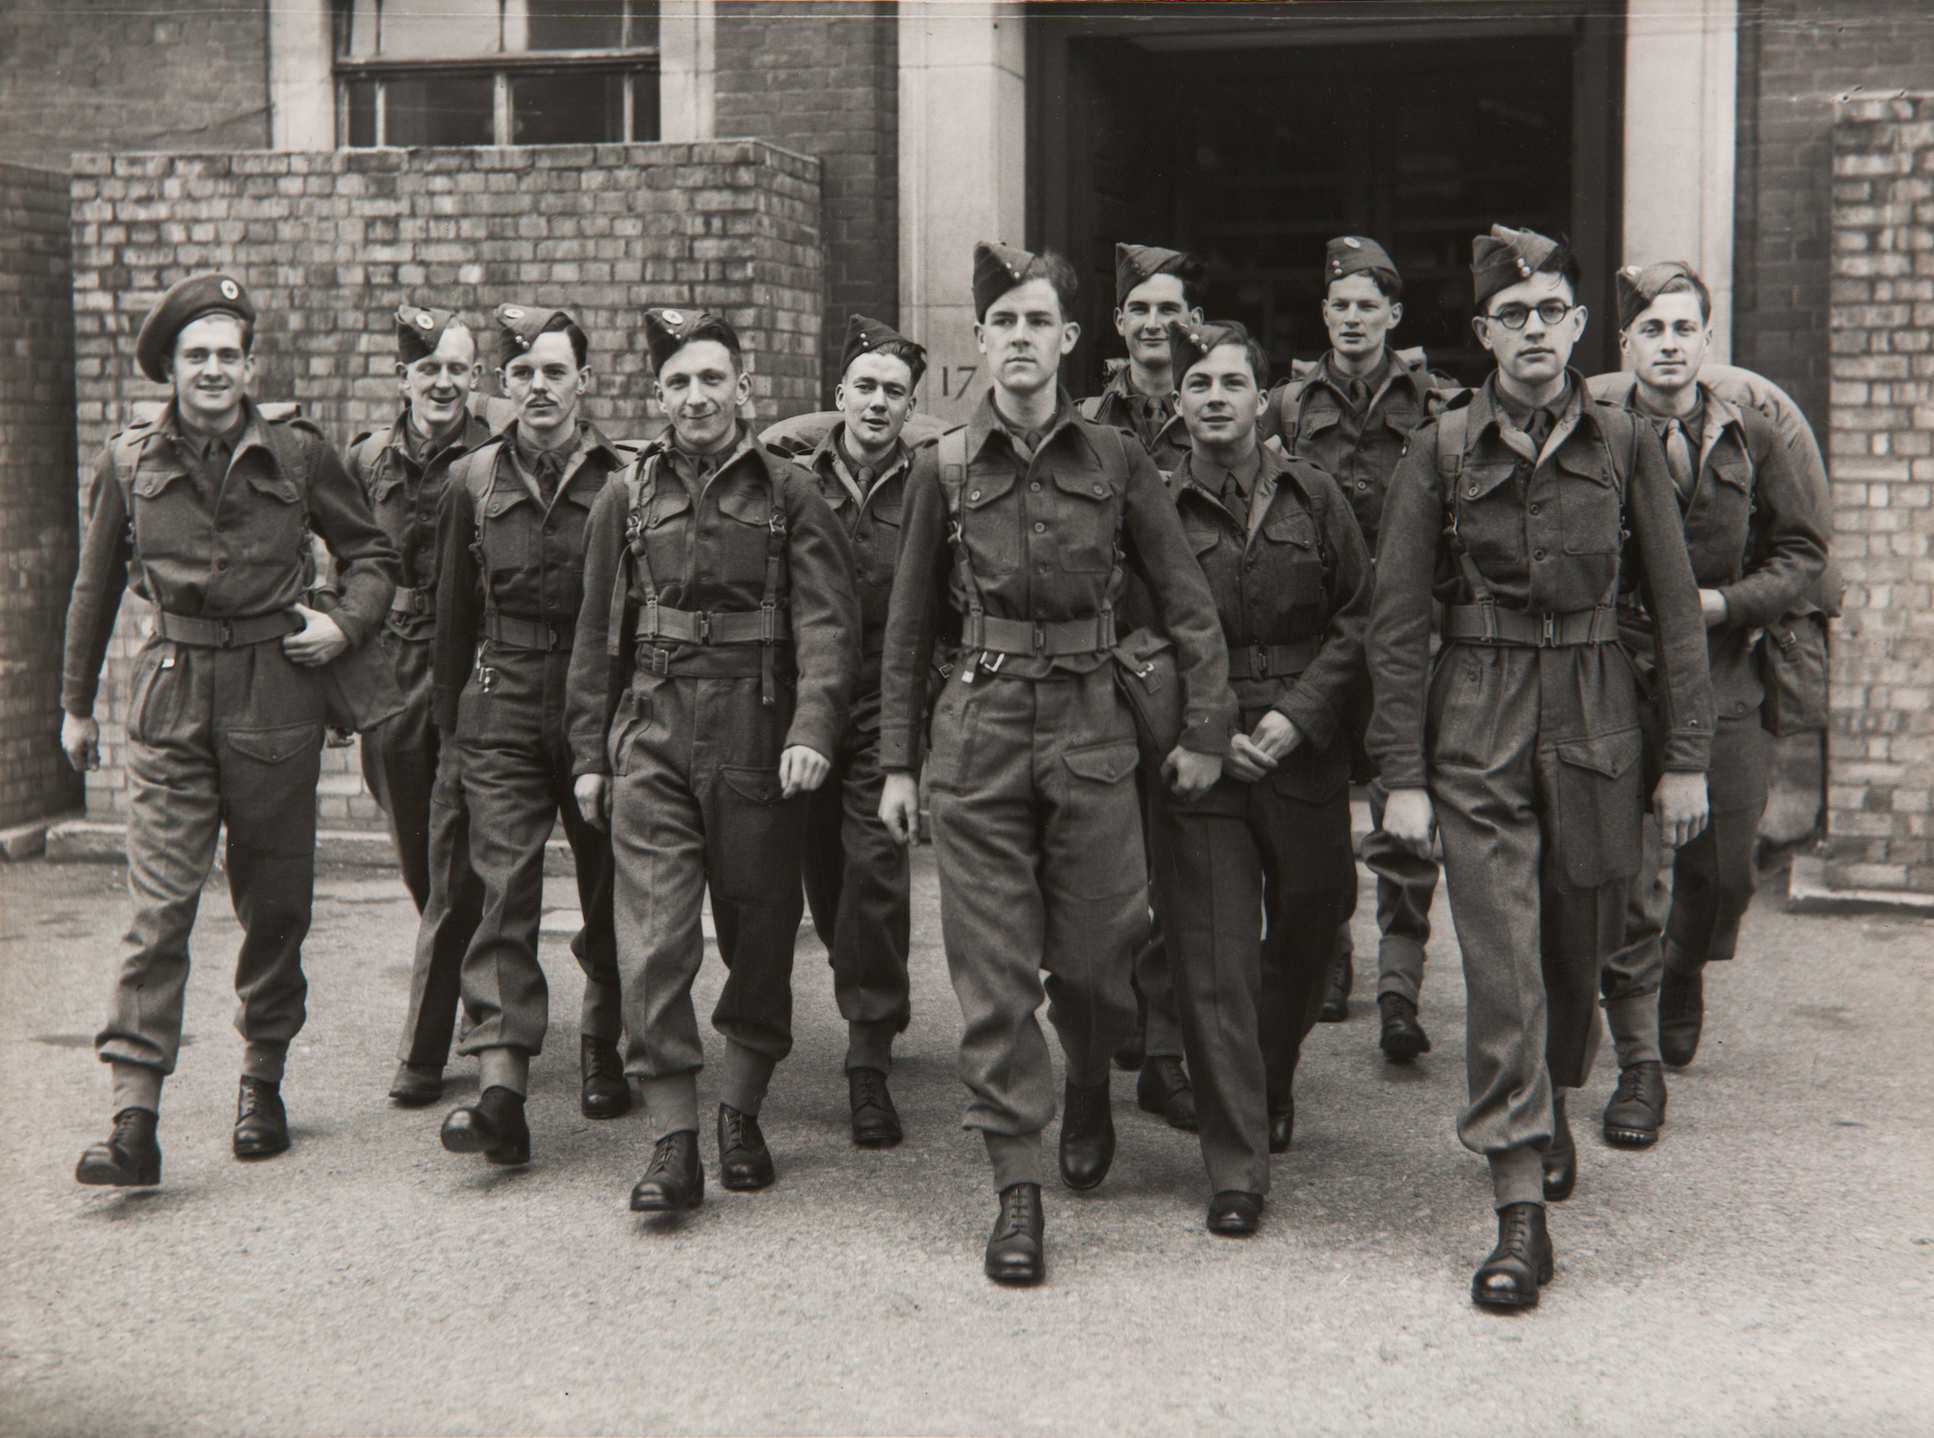 The party of medical students leaving for the liberated Bergen-Belsen Concentration Camp in Germany, 20 April 1945 (Image: Chelsea and Westminster Hospital)